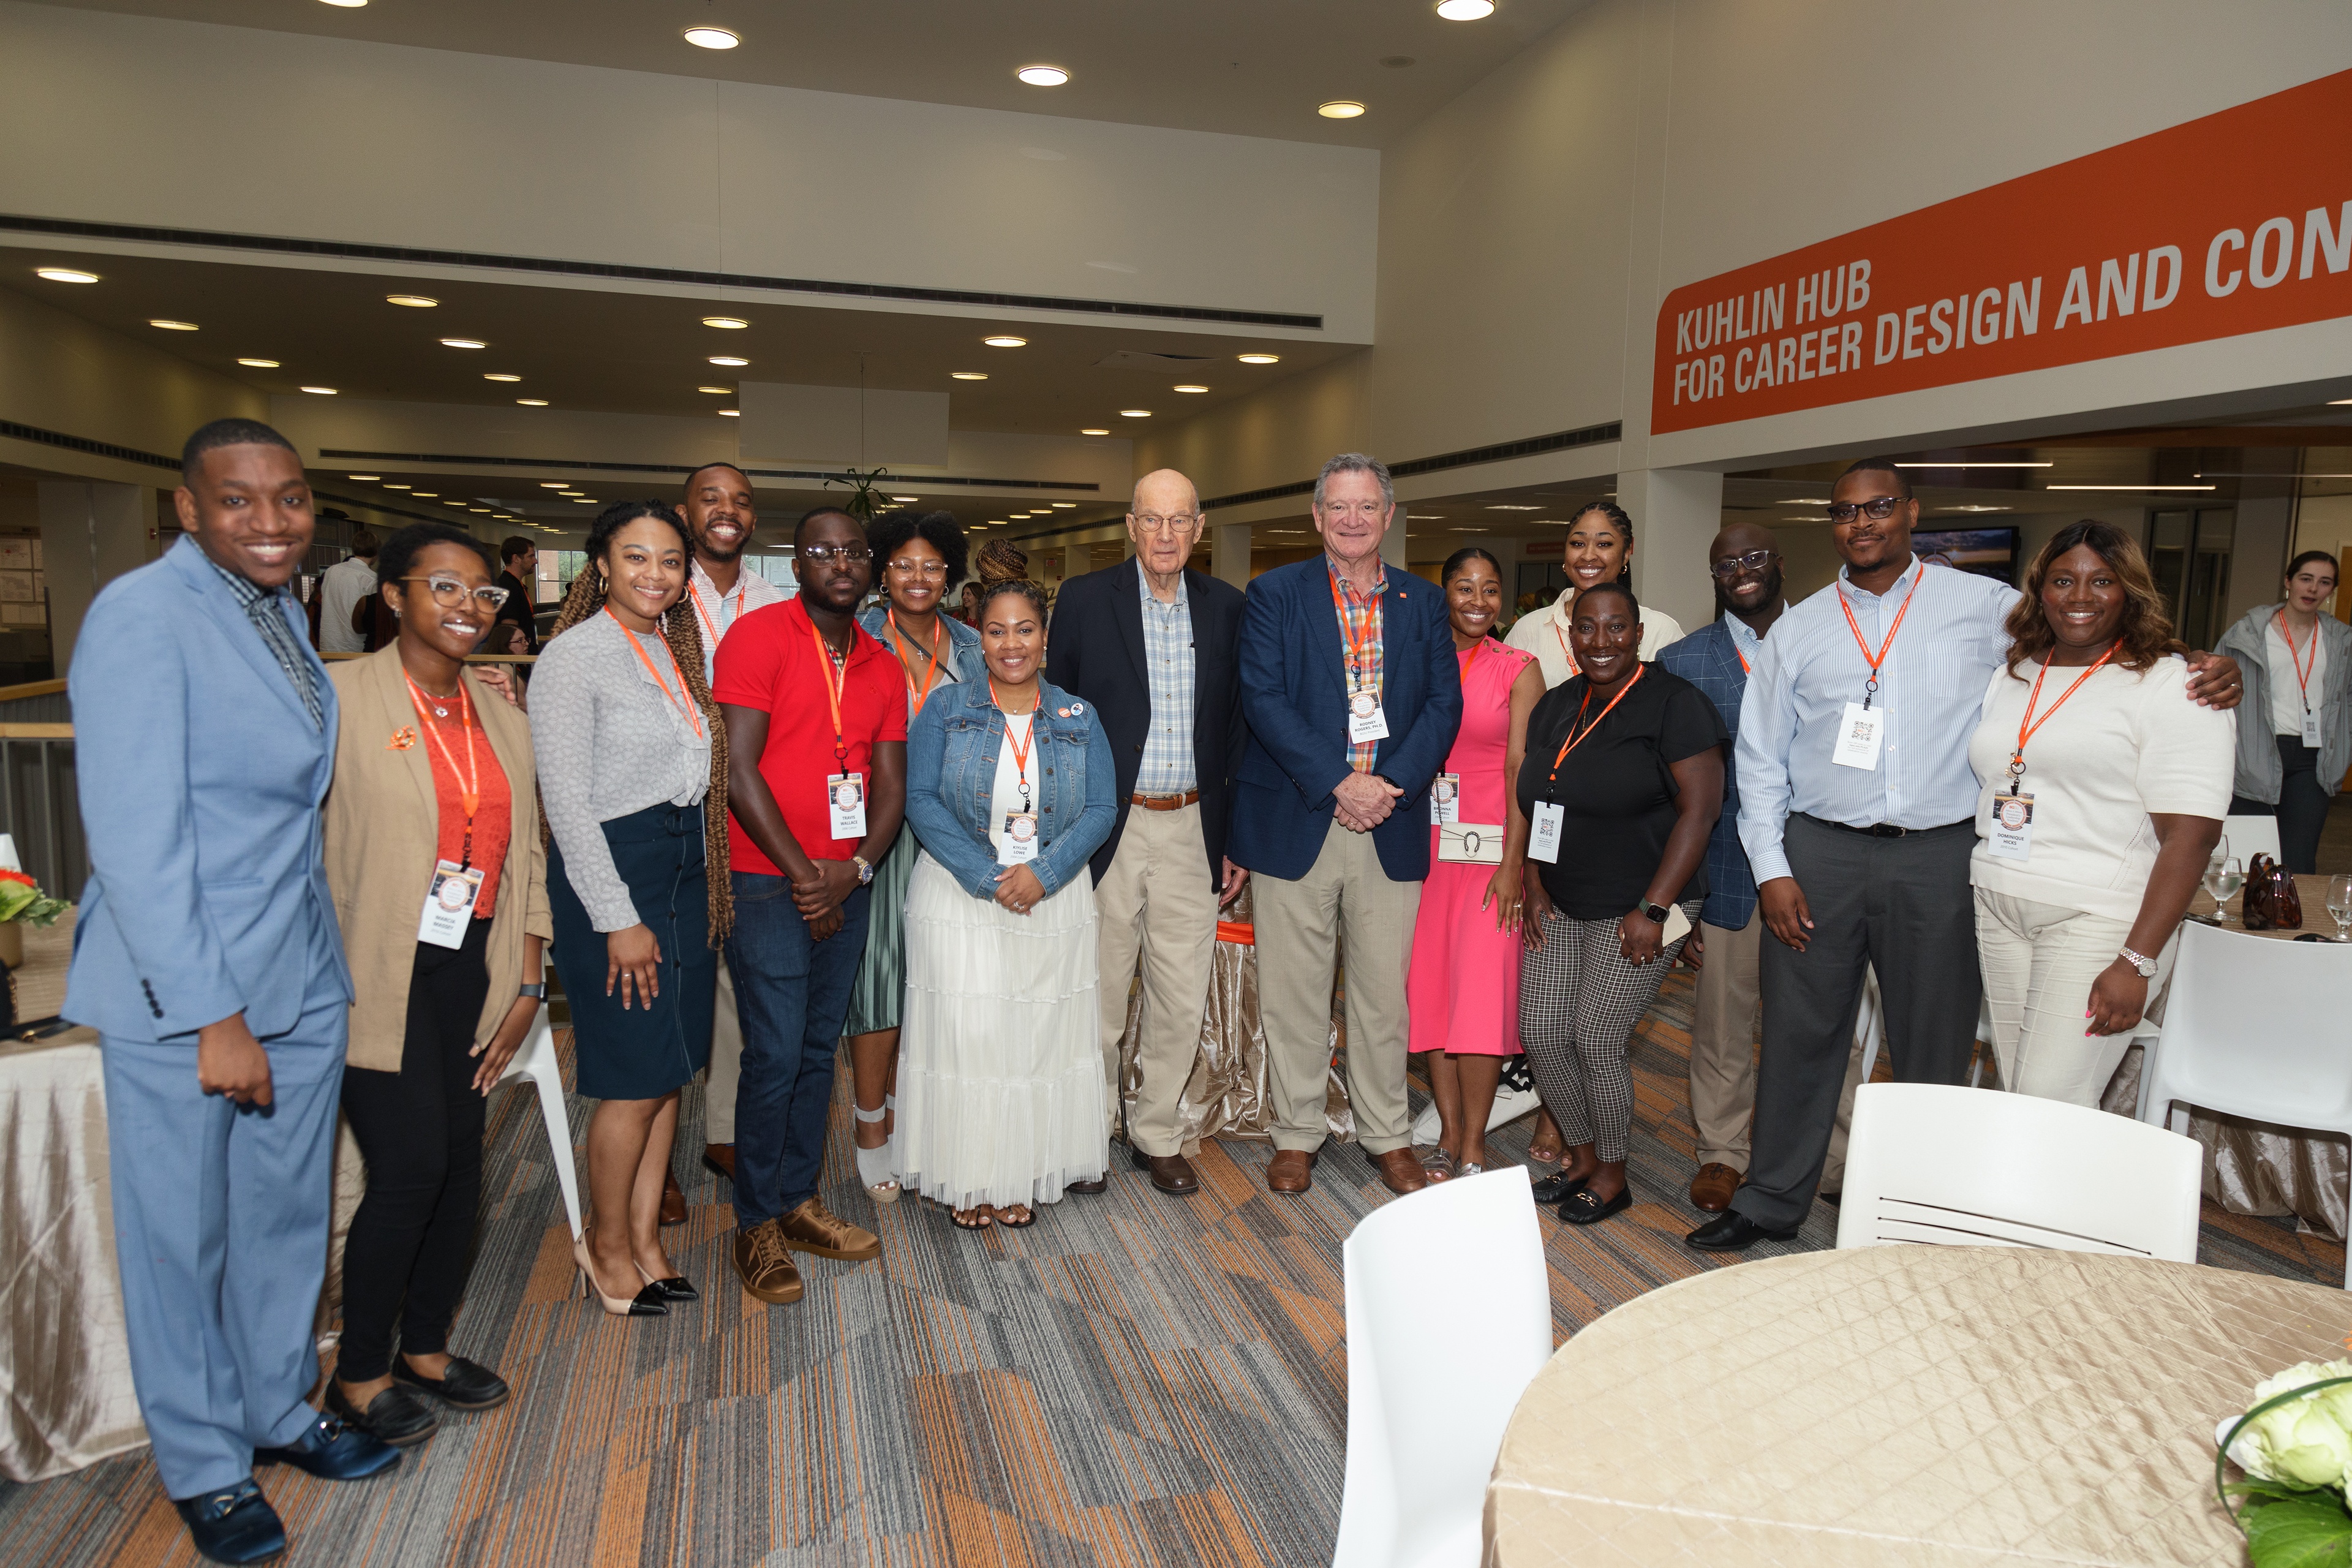 Robert M. Thompson ’55, ‘06 (Hon.) joined Thompson scholars for a reception during the celebration weekend. (BGSU photo)